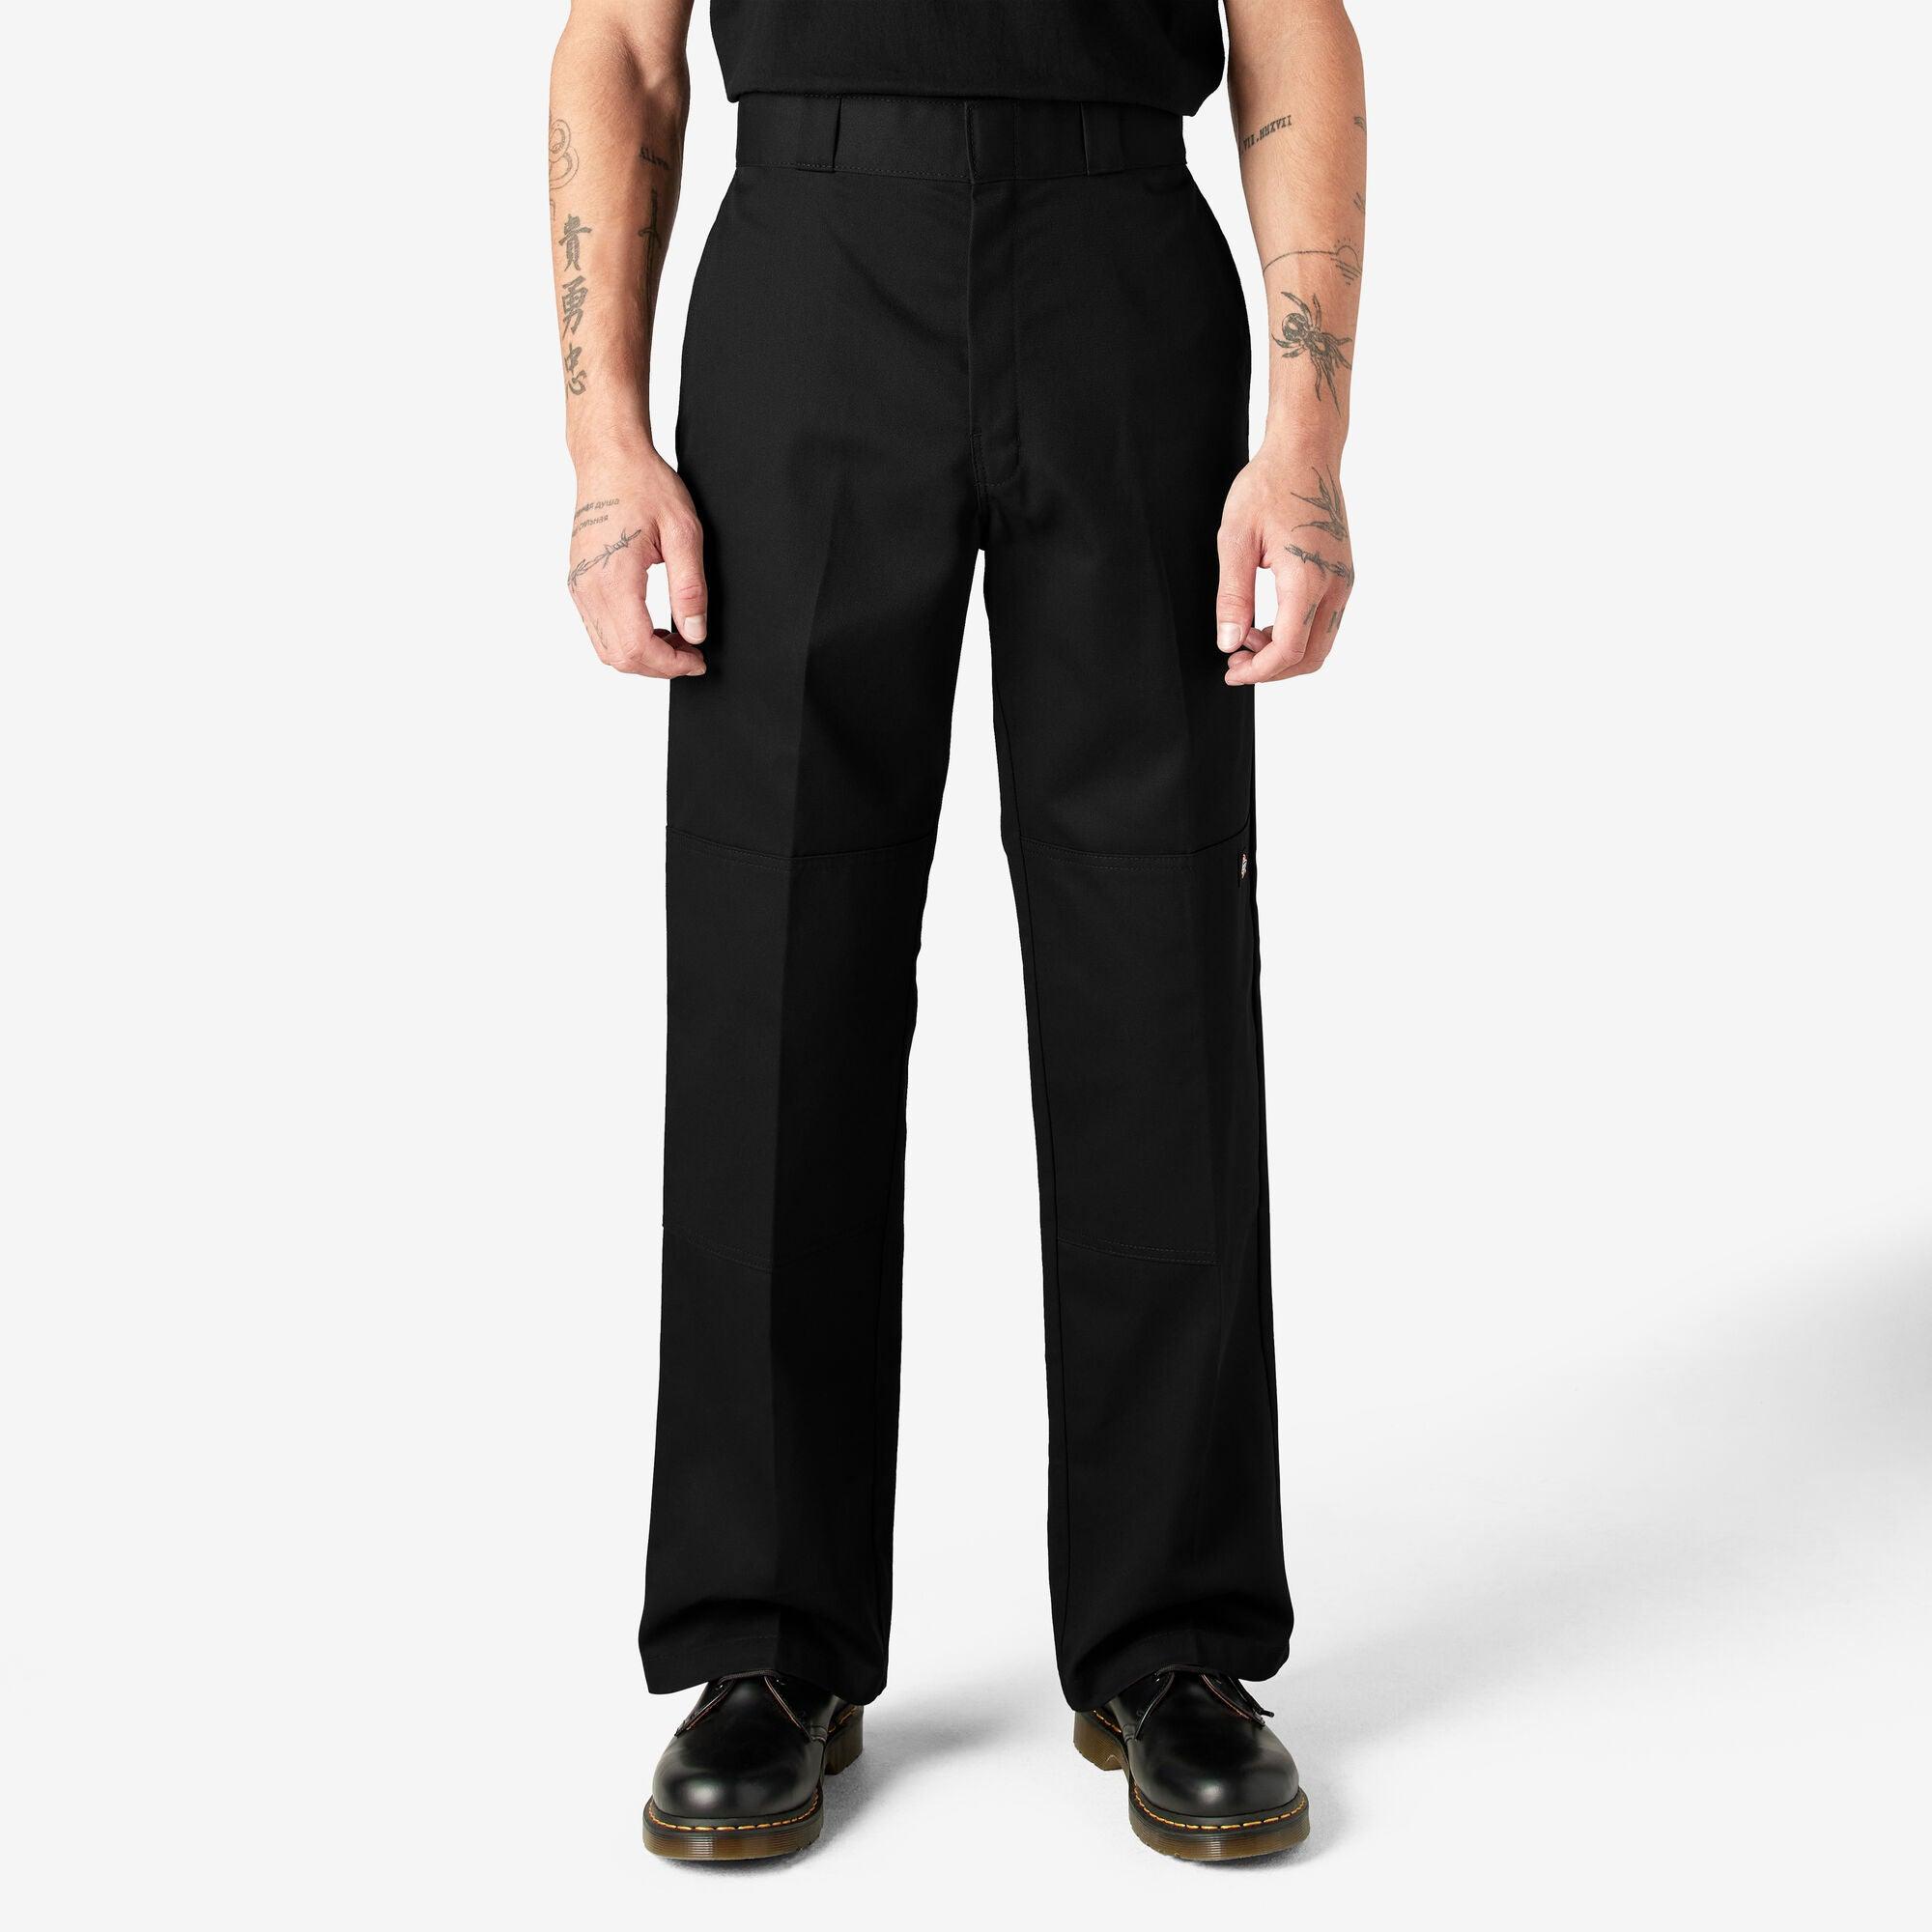 Loose Fit Double Knee Work Pants, Black - Purpose-Built / Home of the Trades